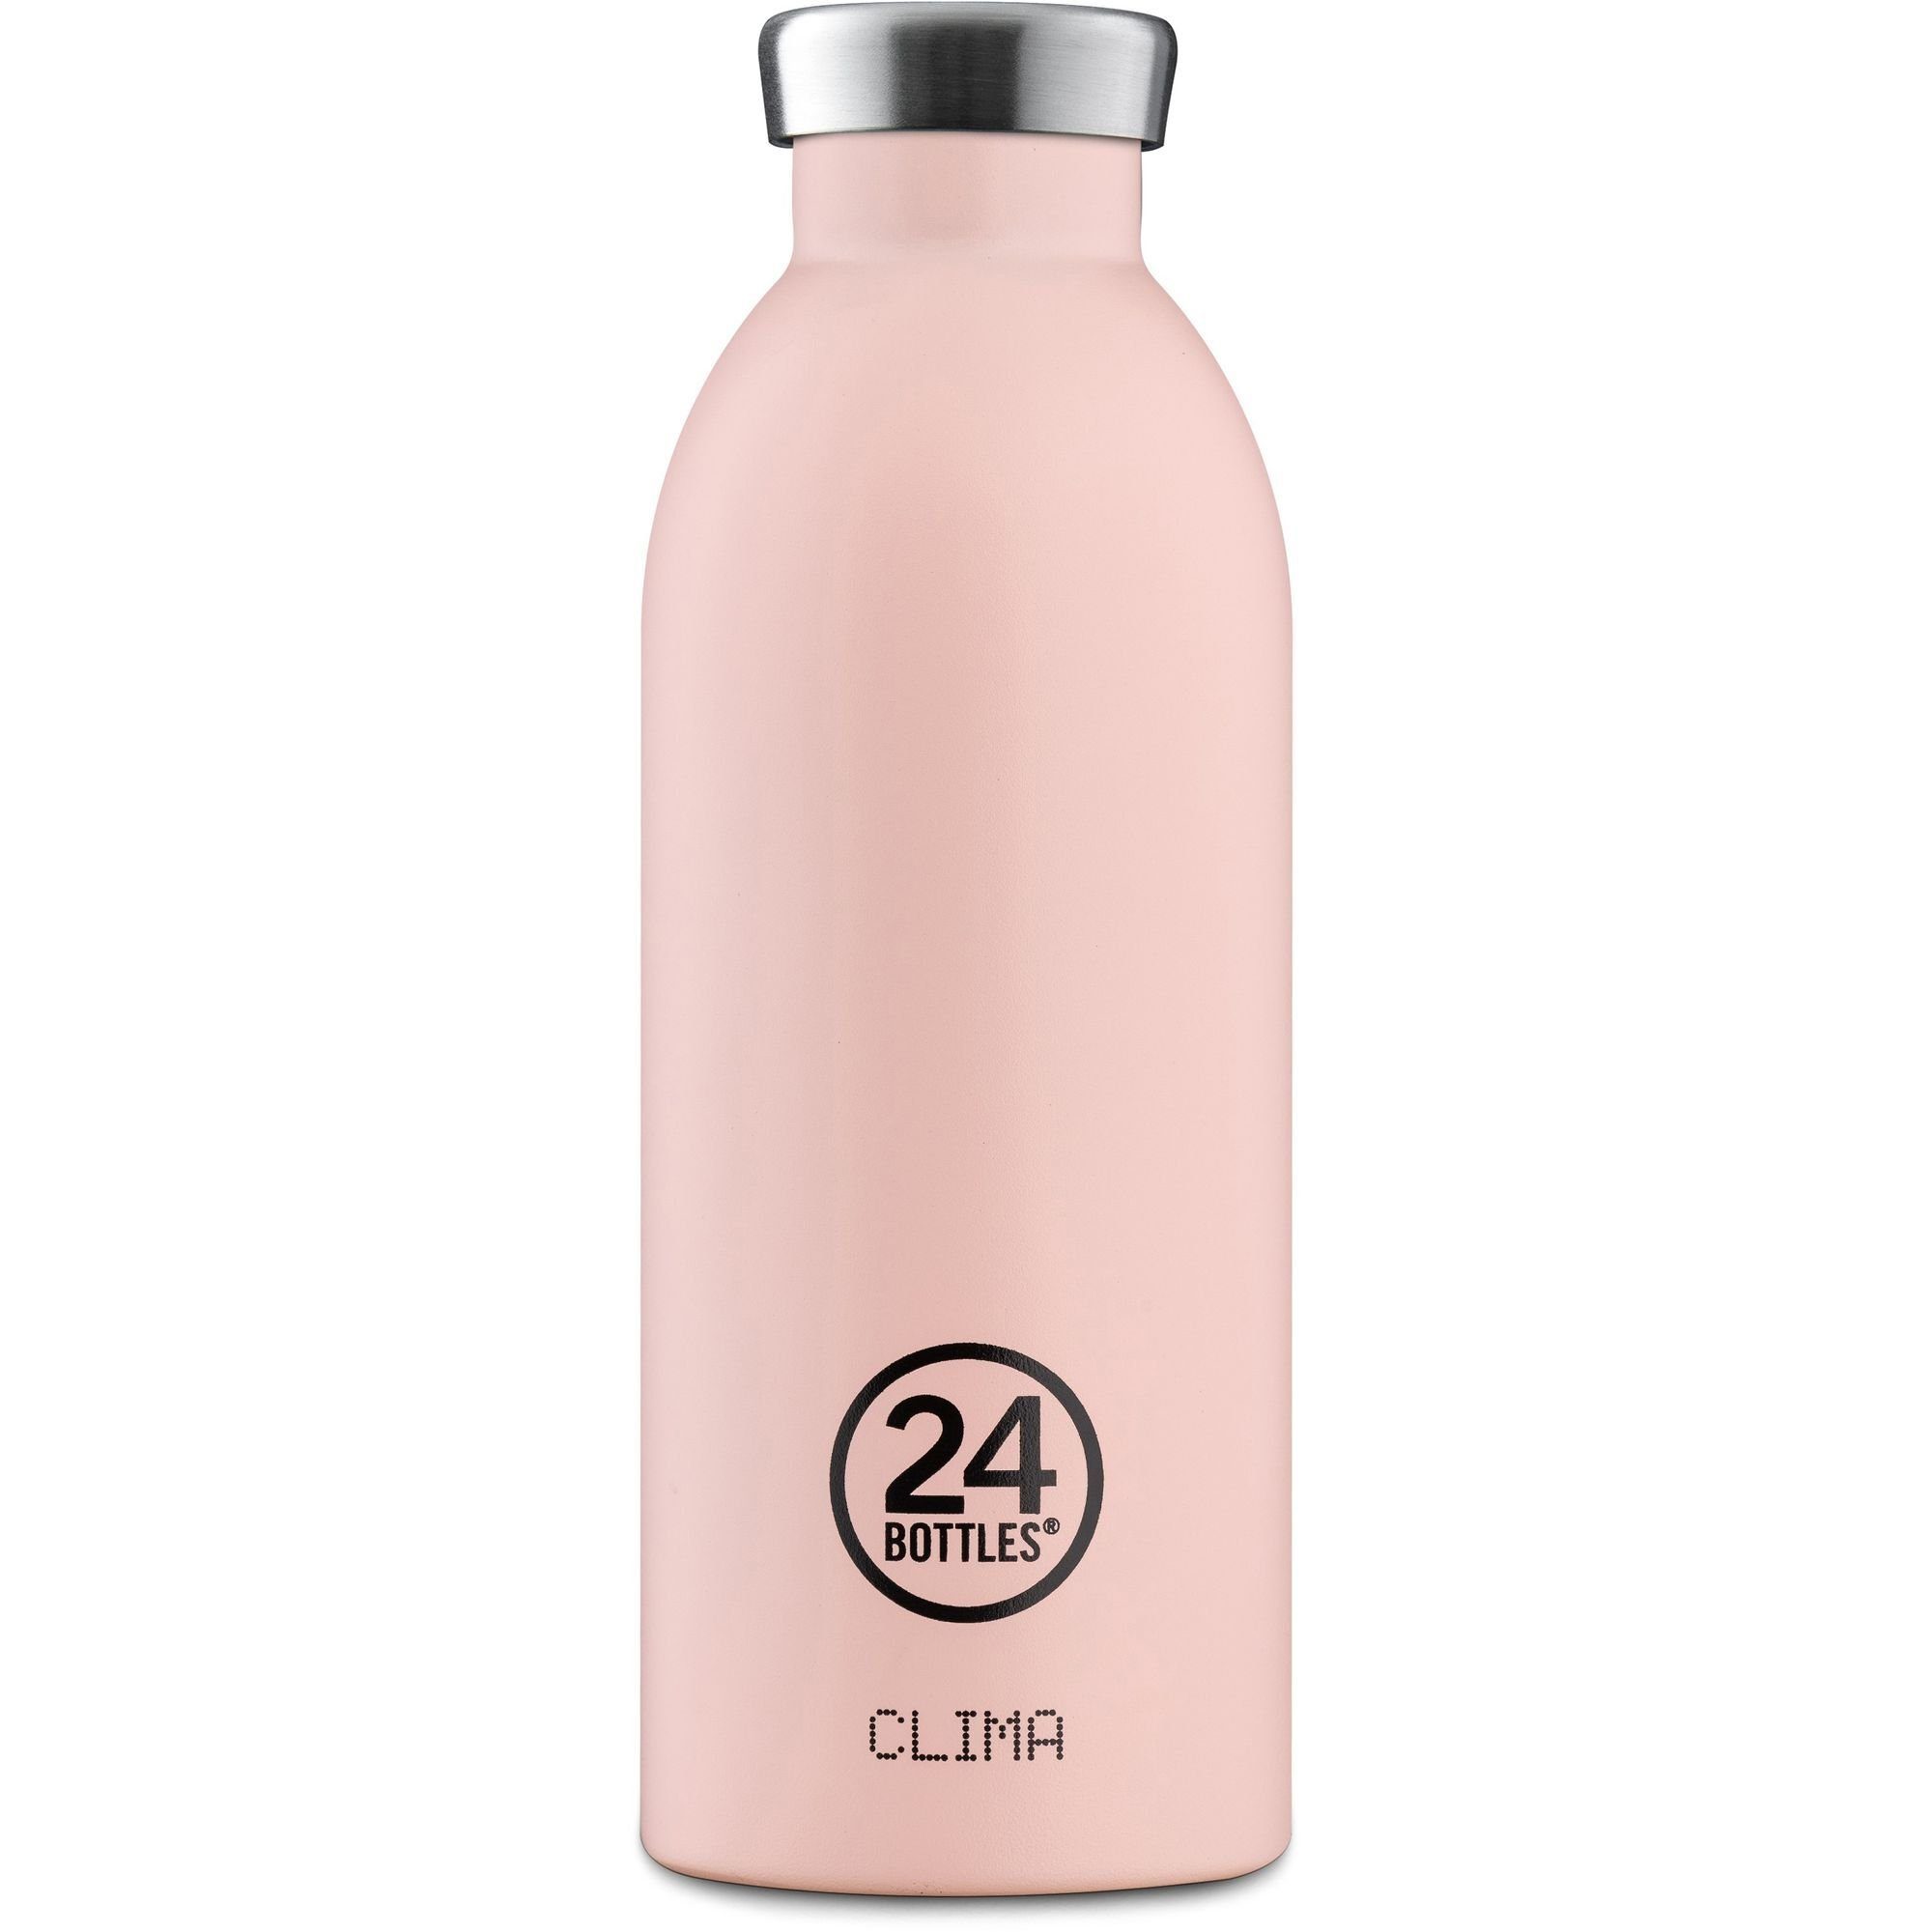 Clima Trinkflasche Bottles pink 24 dusty